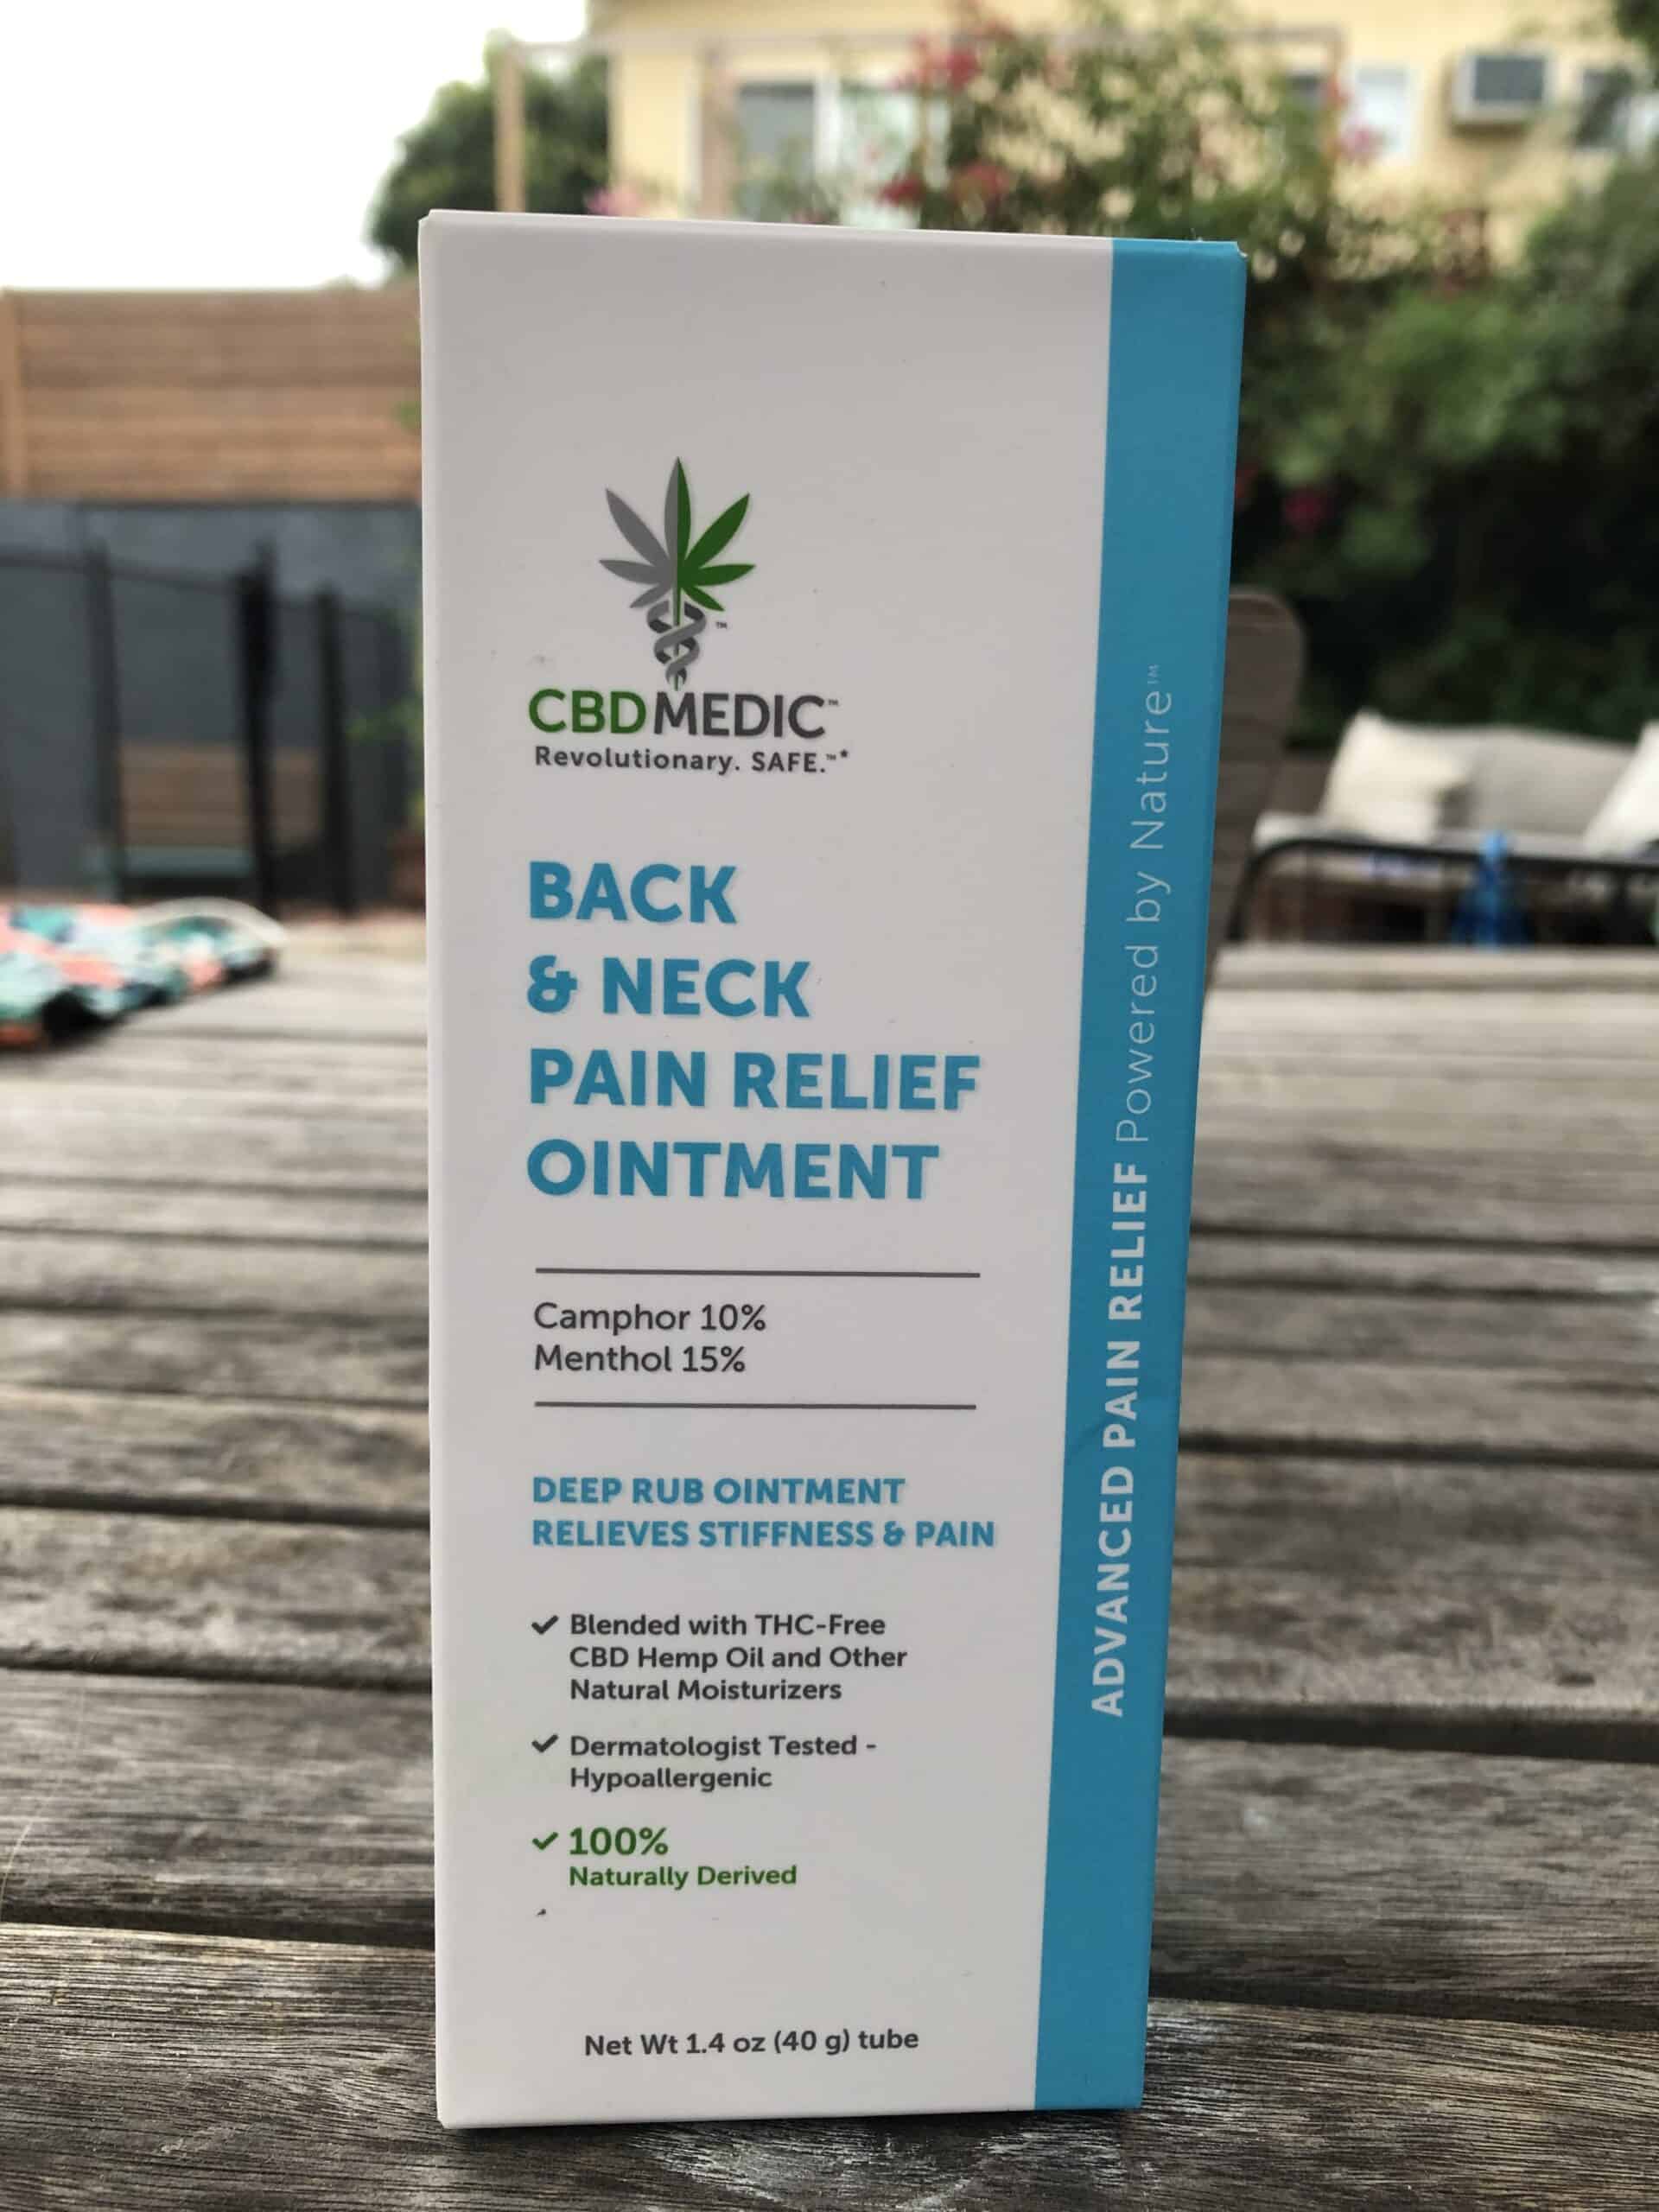 CBDmedic Back & Neck Pain Relief Ointment